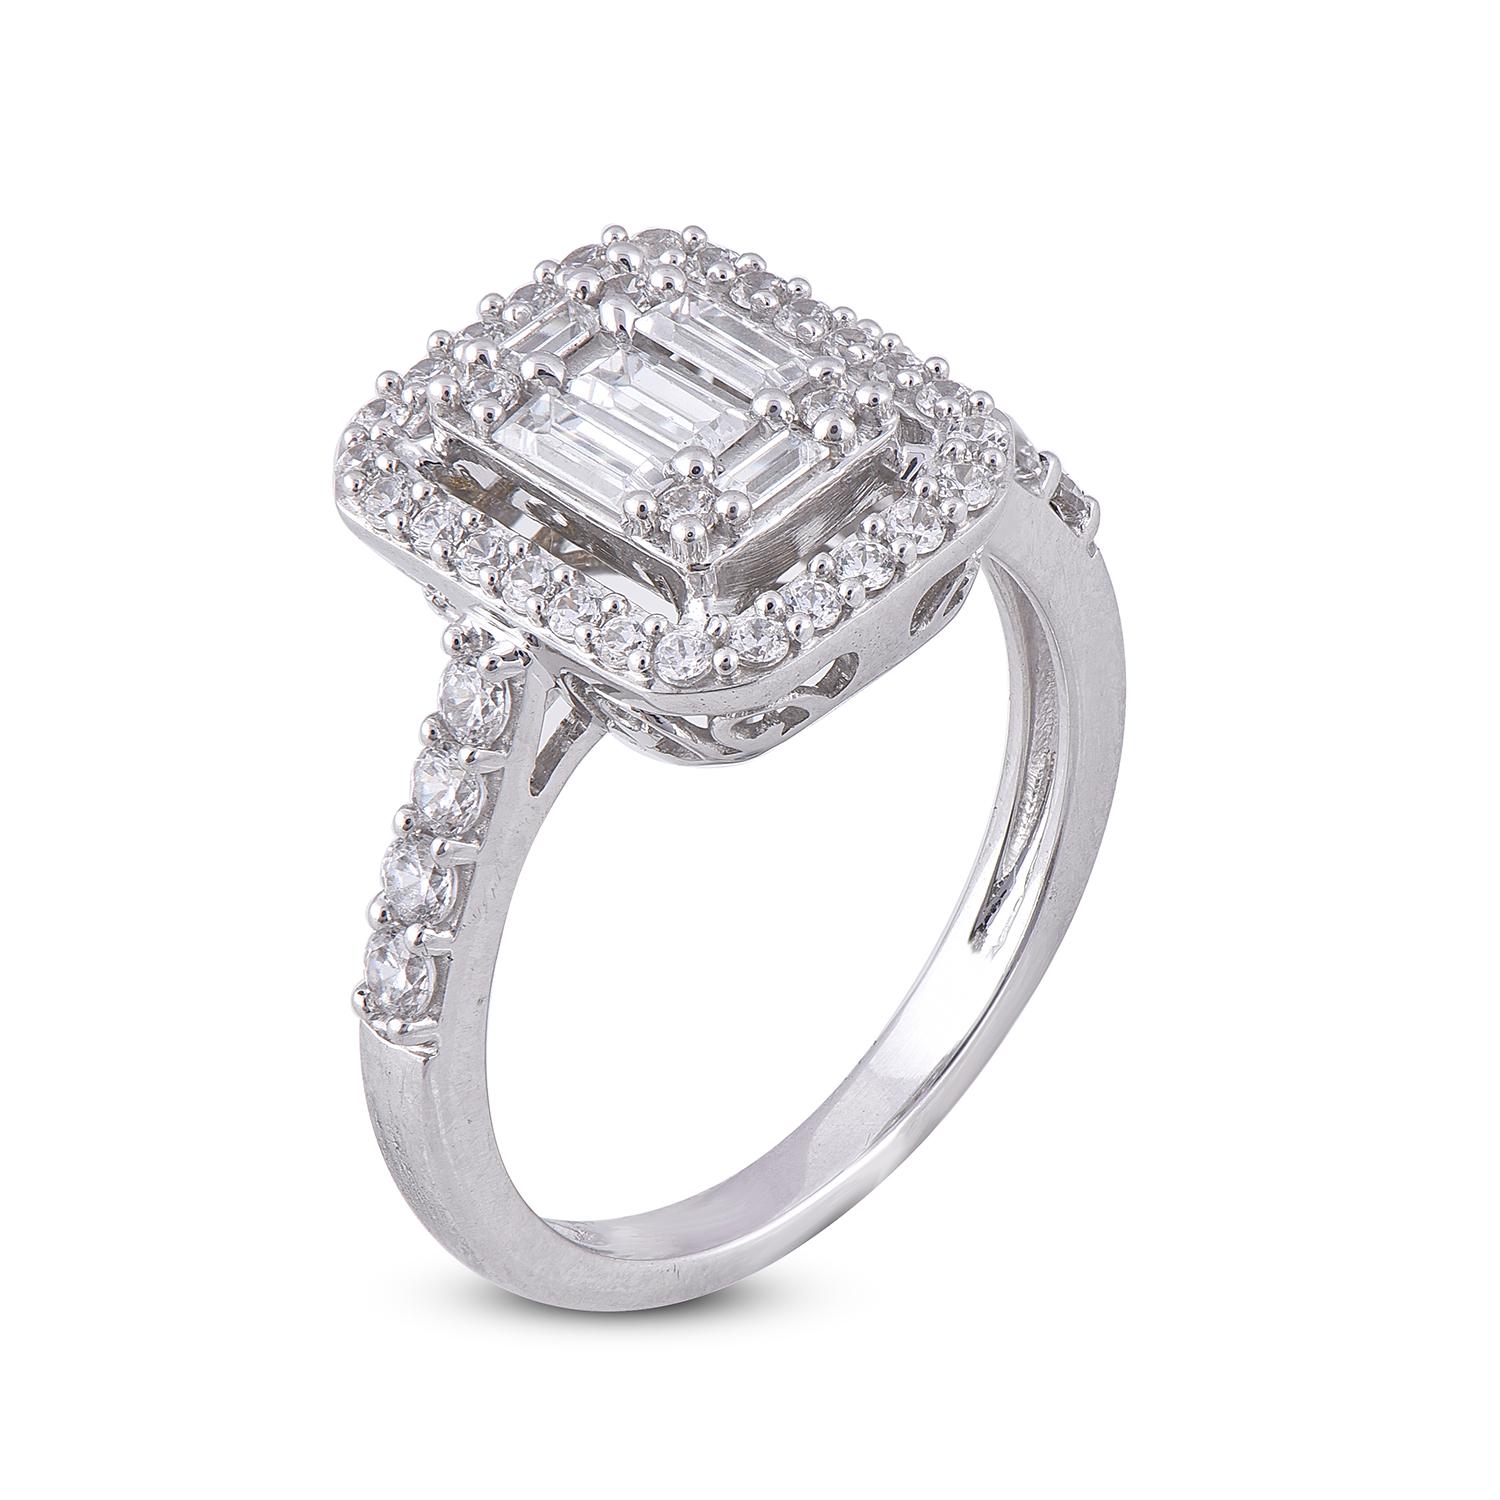 This diamond engagement ring is made in 14 karat White gold and studded beautifully with 38 round diamond and 5 Baguette cut diamond set in prong setting, diamonds are graded H-I Color, I2 Clarity.
